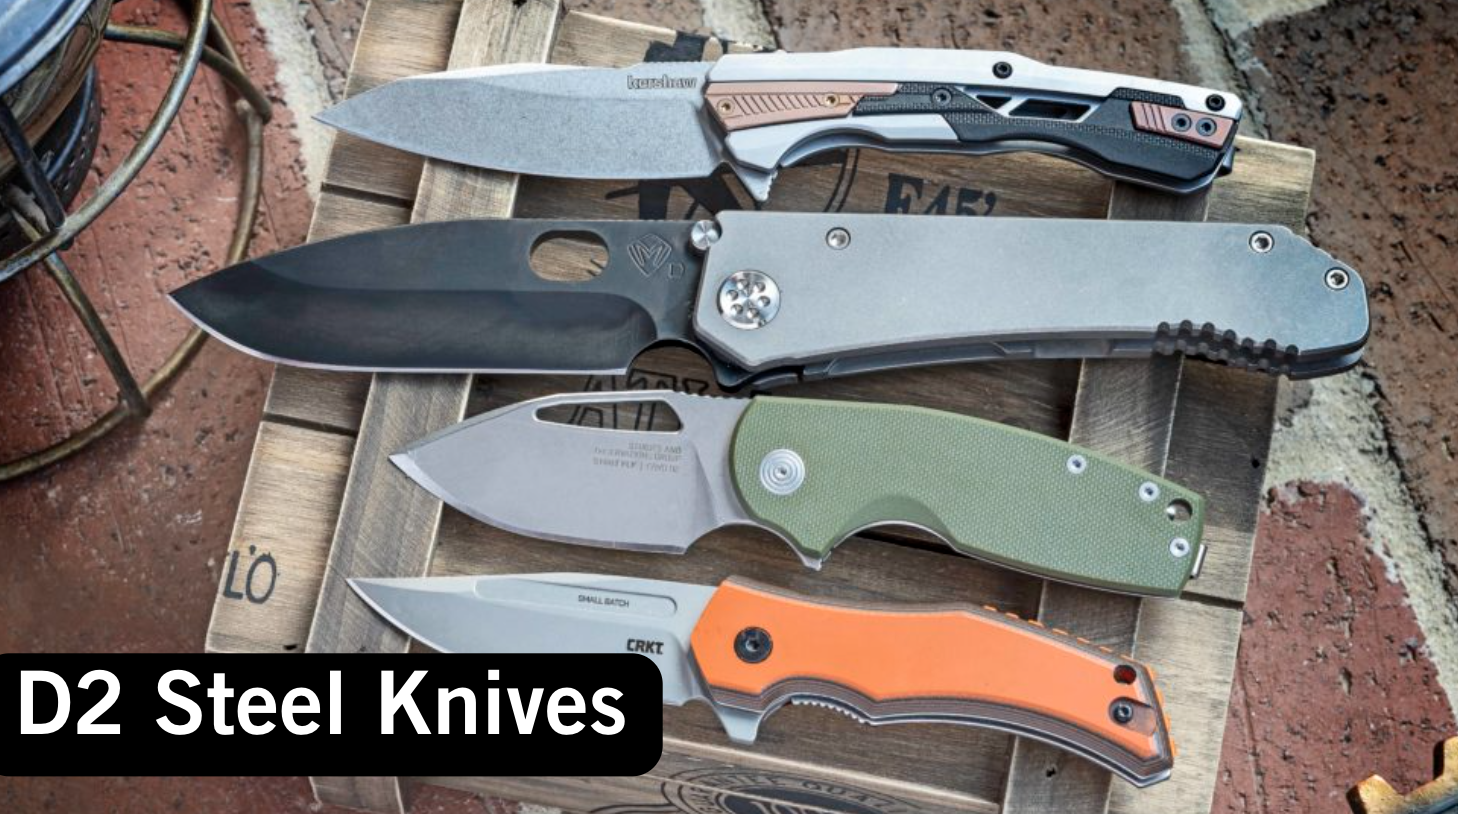 A Visual Guide to 13 Extremely Handy Knife Cuts